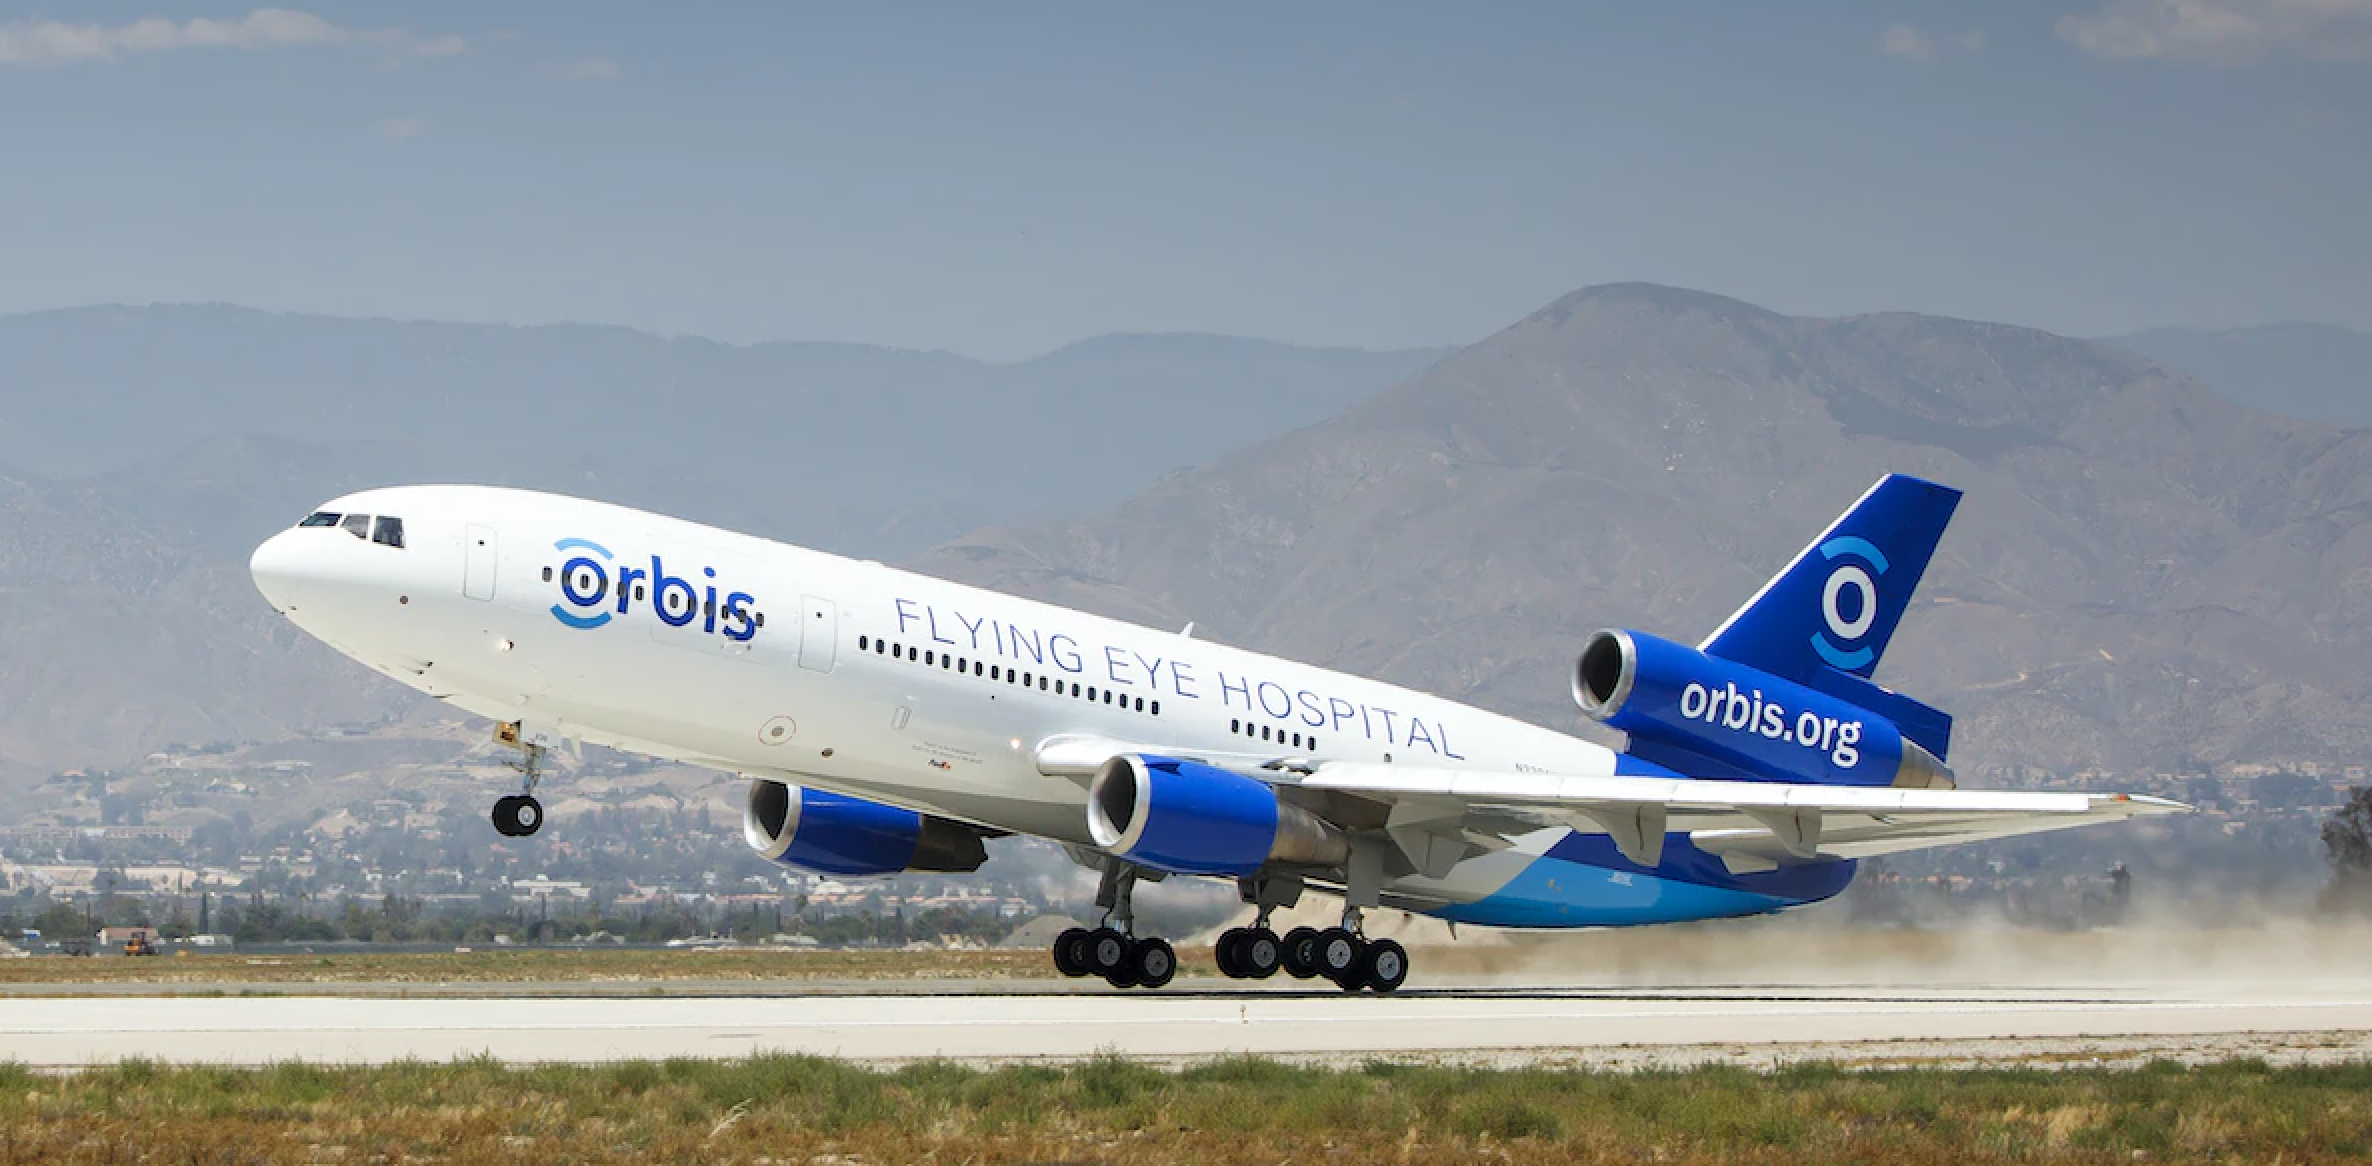 The Orbis Flying Eye Hospital is an MD-10 aircraft donated by FedEx.